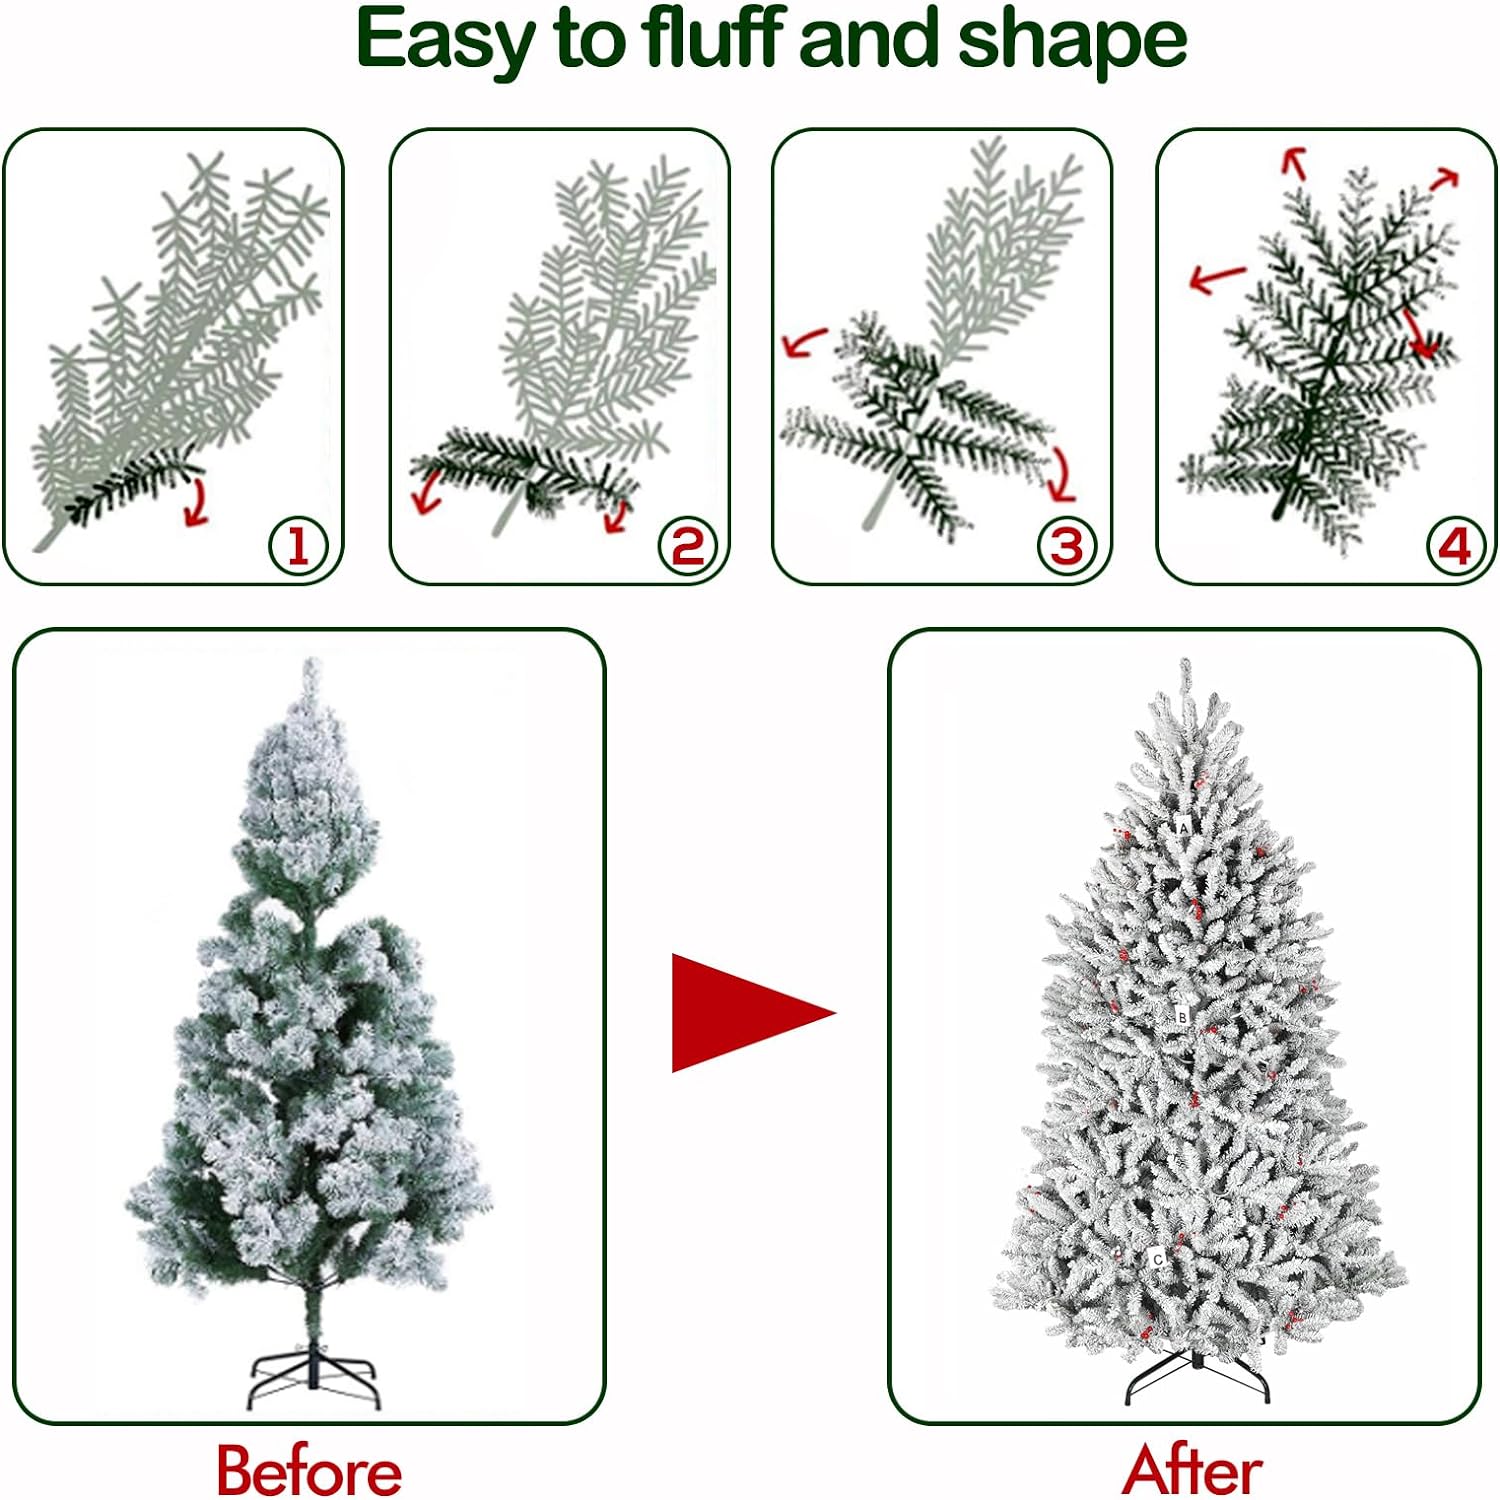 Hykolity 6.5'/7.5' Snow Flocked Prelit Artificial Fir Christmas Tree with Pine Cones and Berries, PVC Branch Tips, Warm White LED Lights, Metal Stand and Hinged Branches